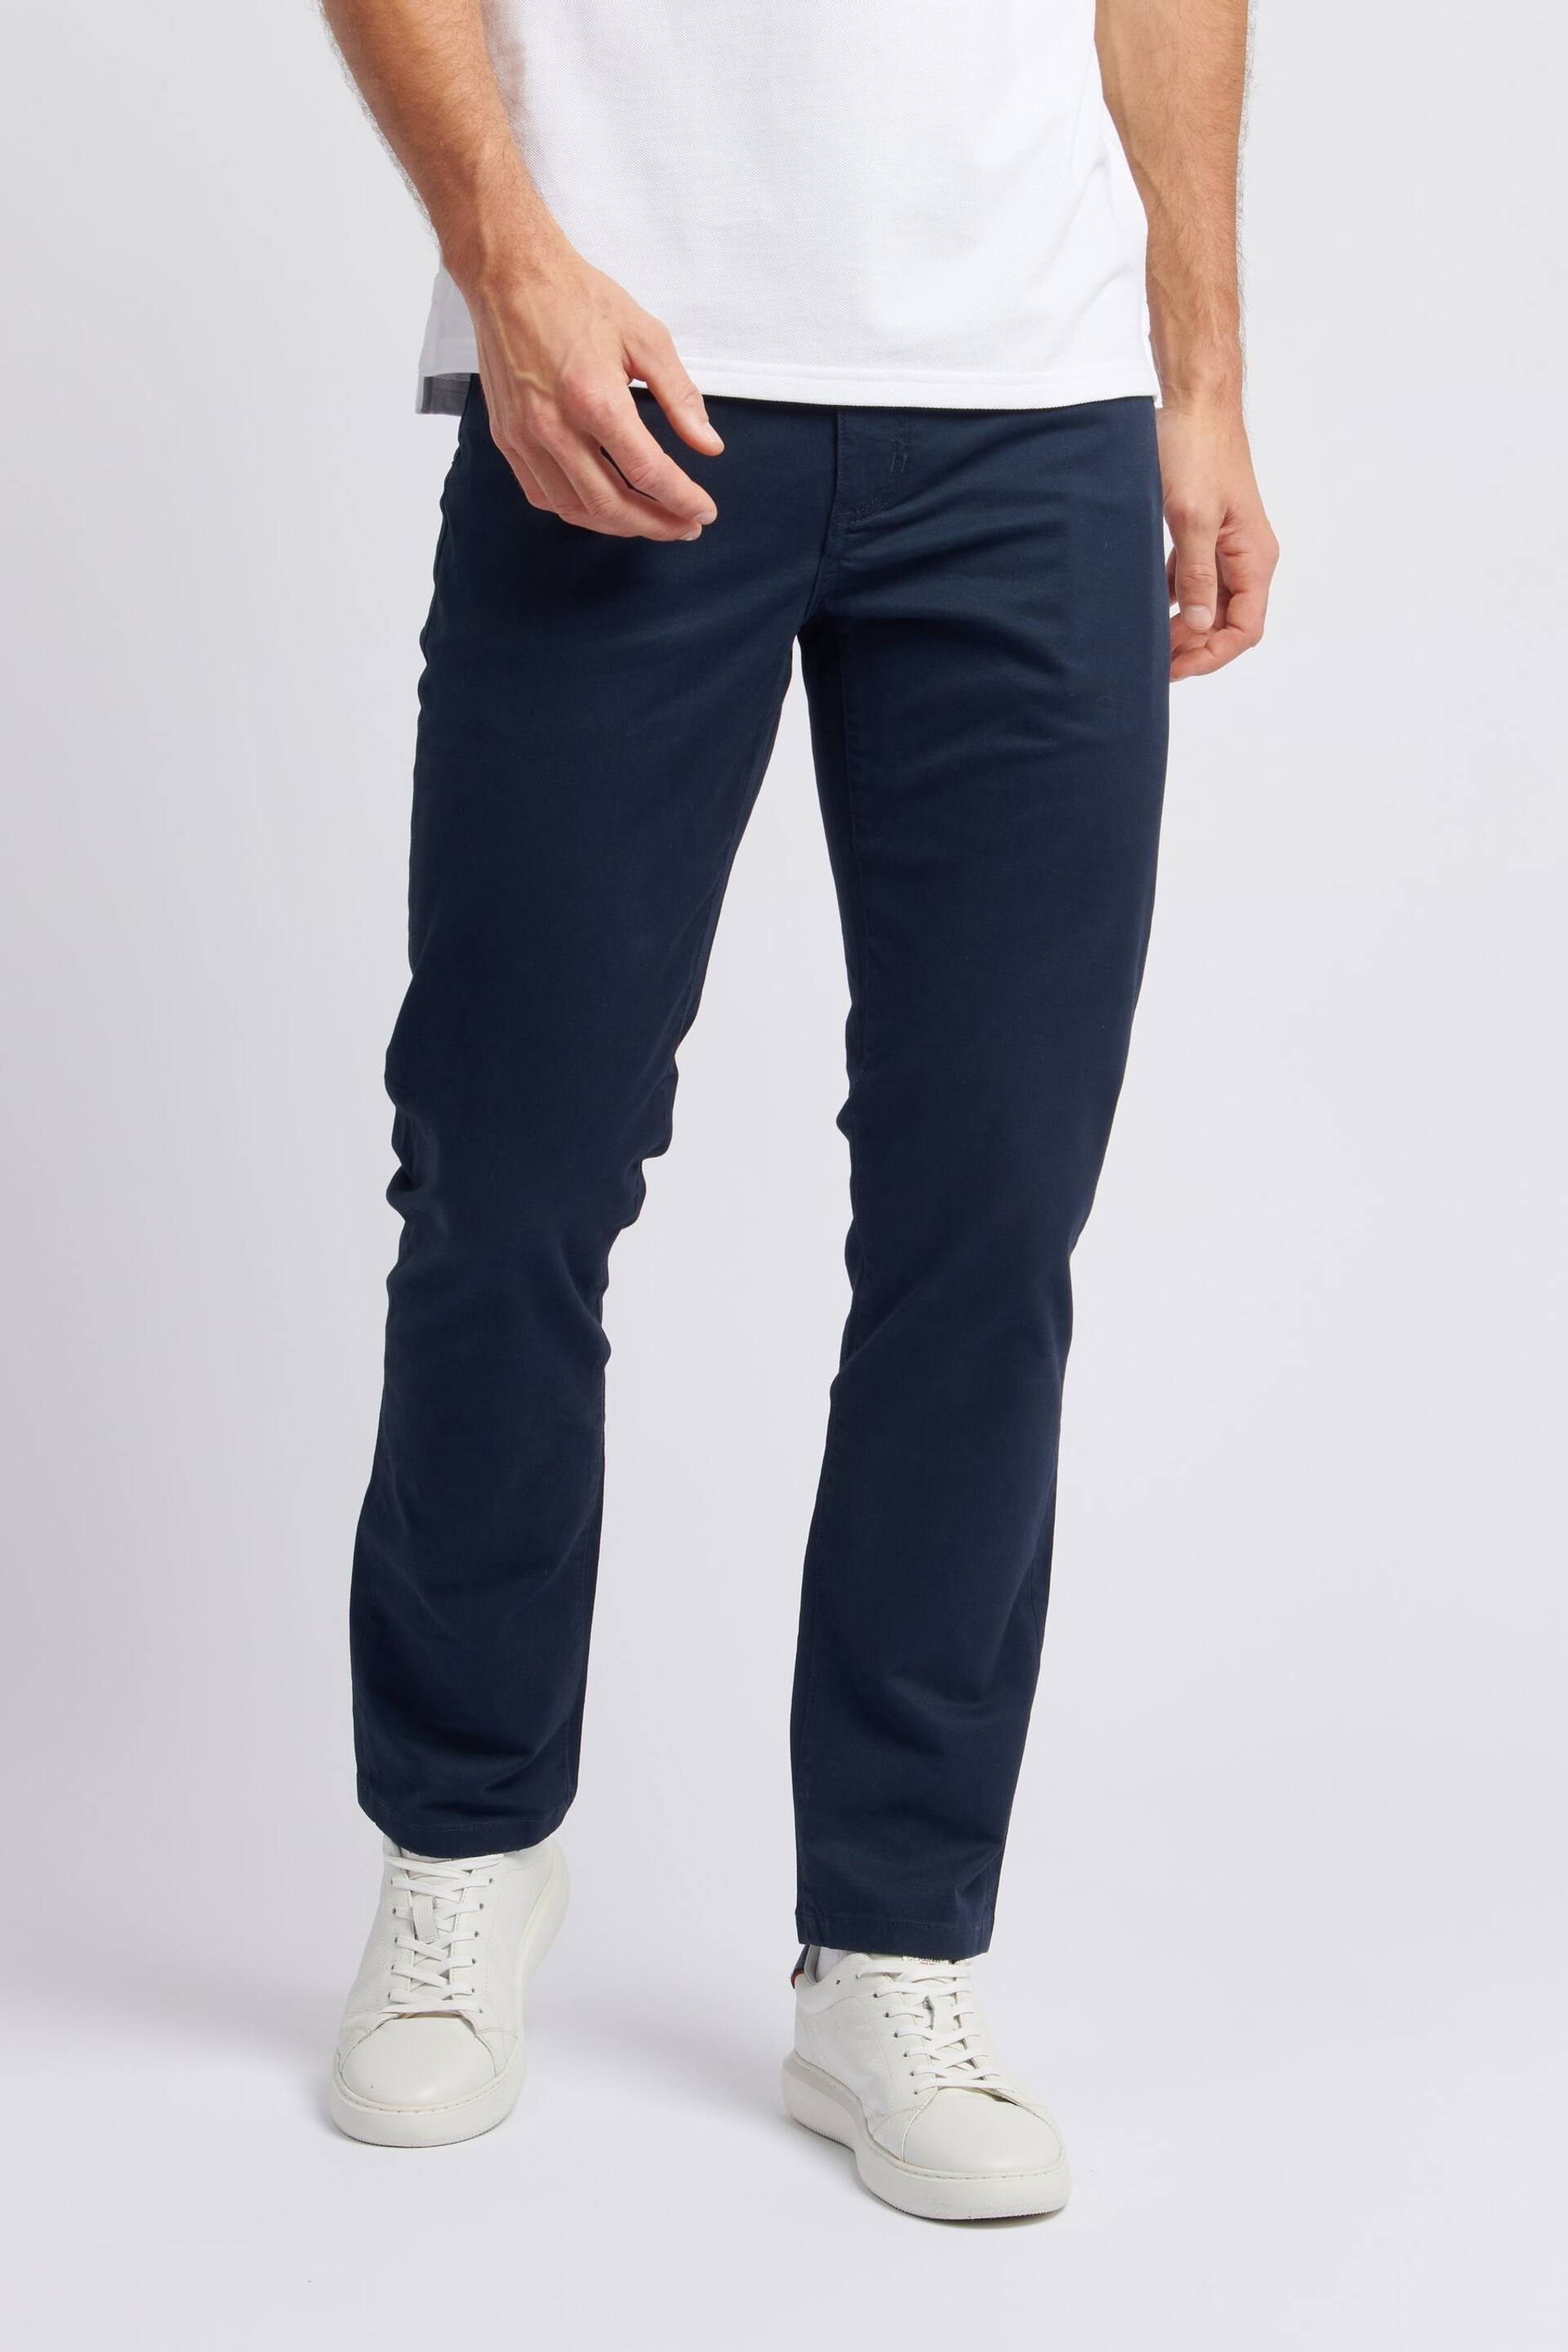 U.S. Polo Assn. Mens Core 5 Pocket Trousers - Image 1 of 4